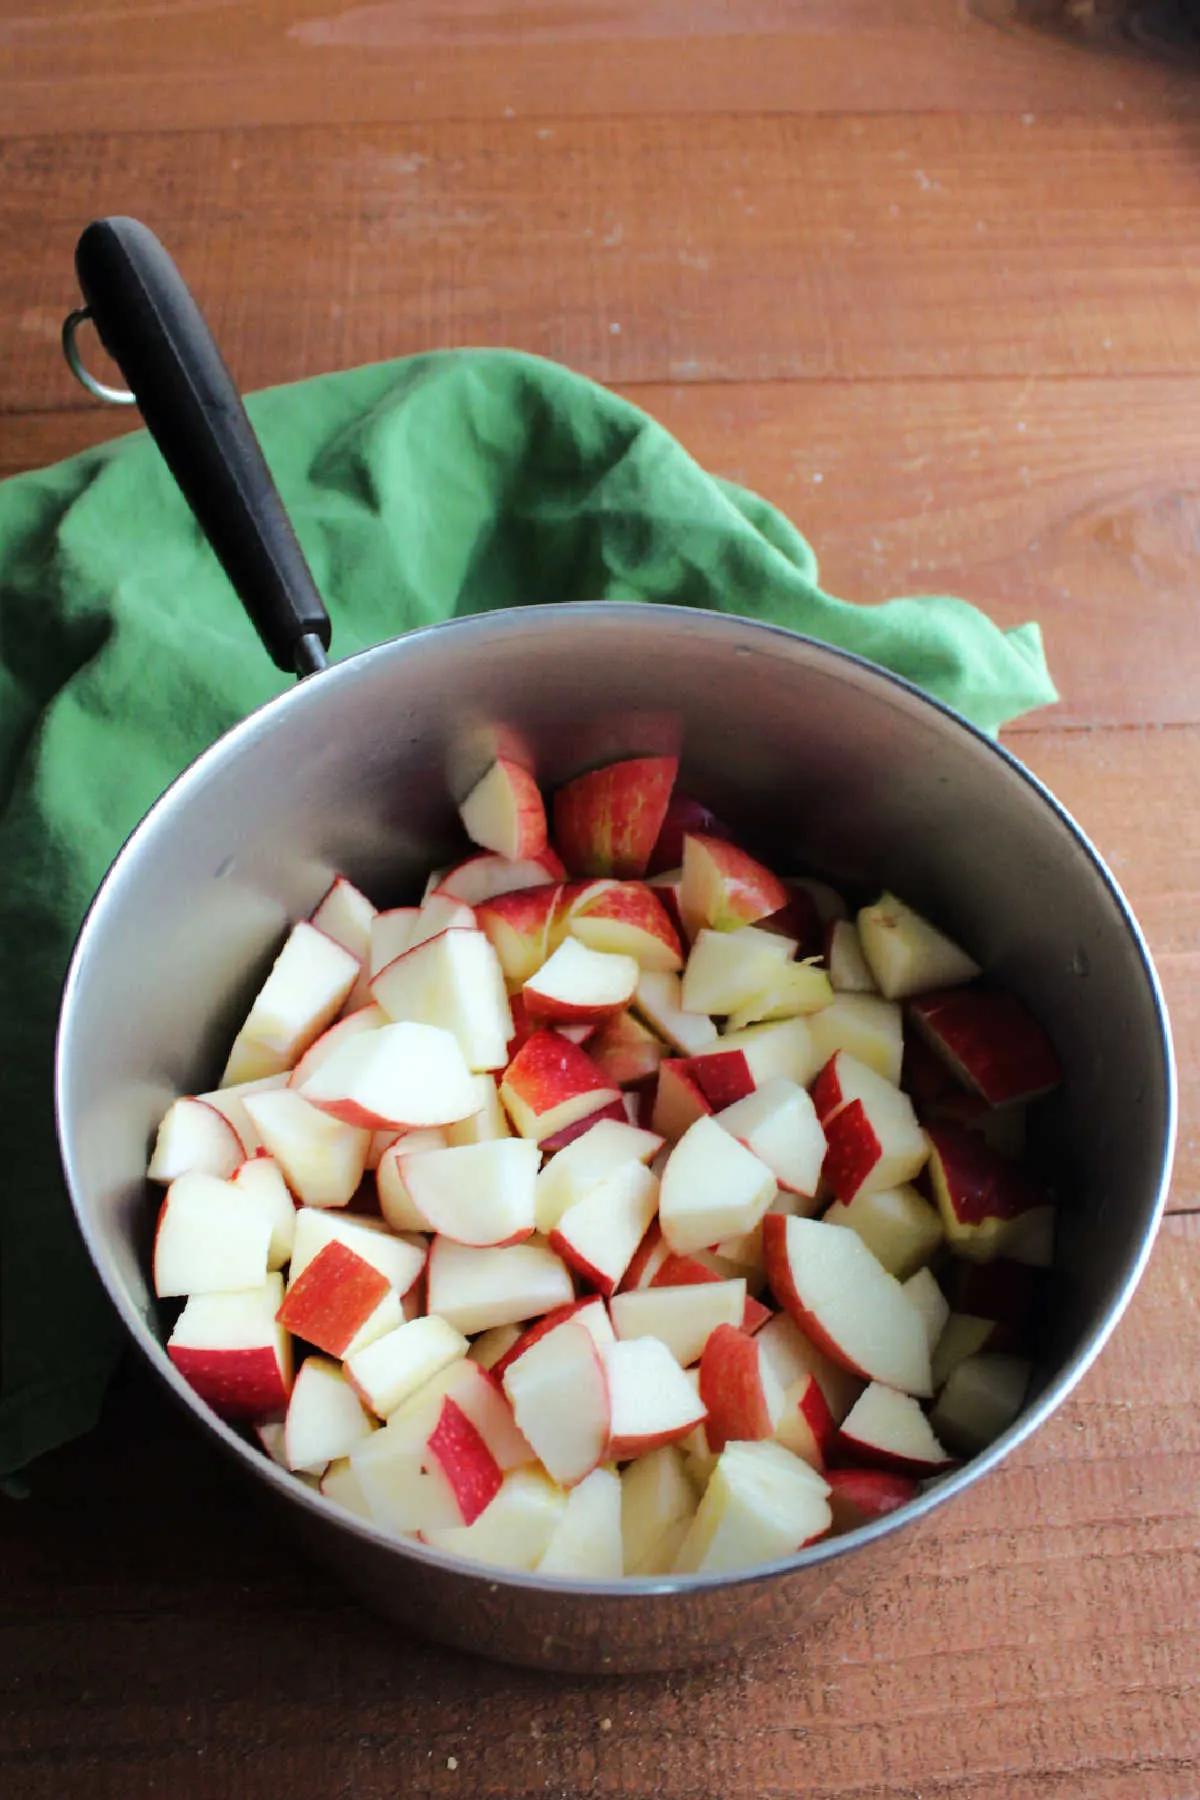 Chunks of apple with peel on them in saucepan with water ready to cook.